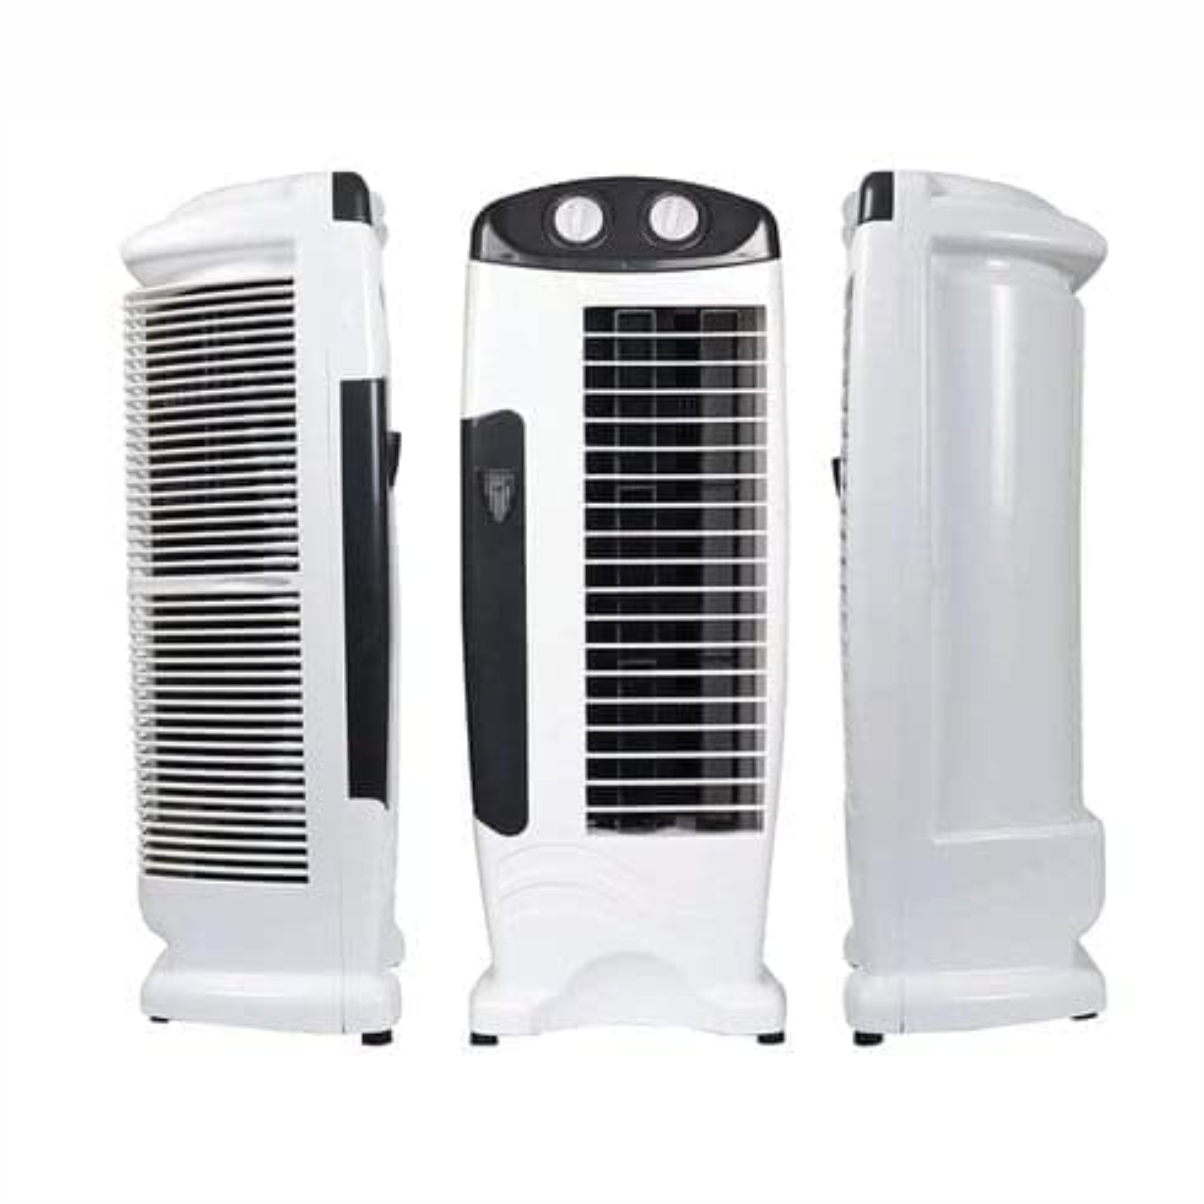 Cooling Tower Fan, High speed, 25 foot Air Delivery, 4-way Air Flow, Low Power Consumption and Anti-Rust Body